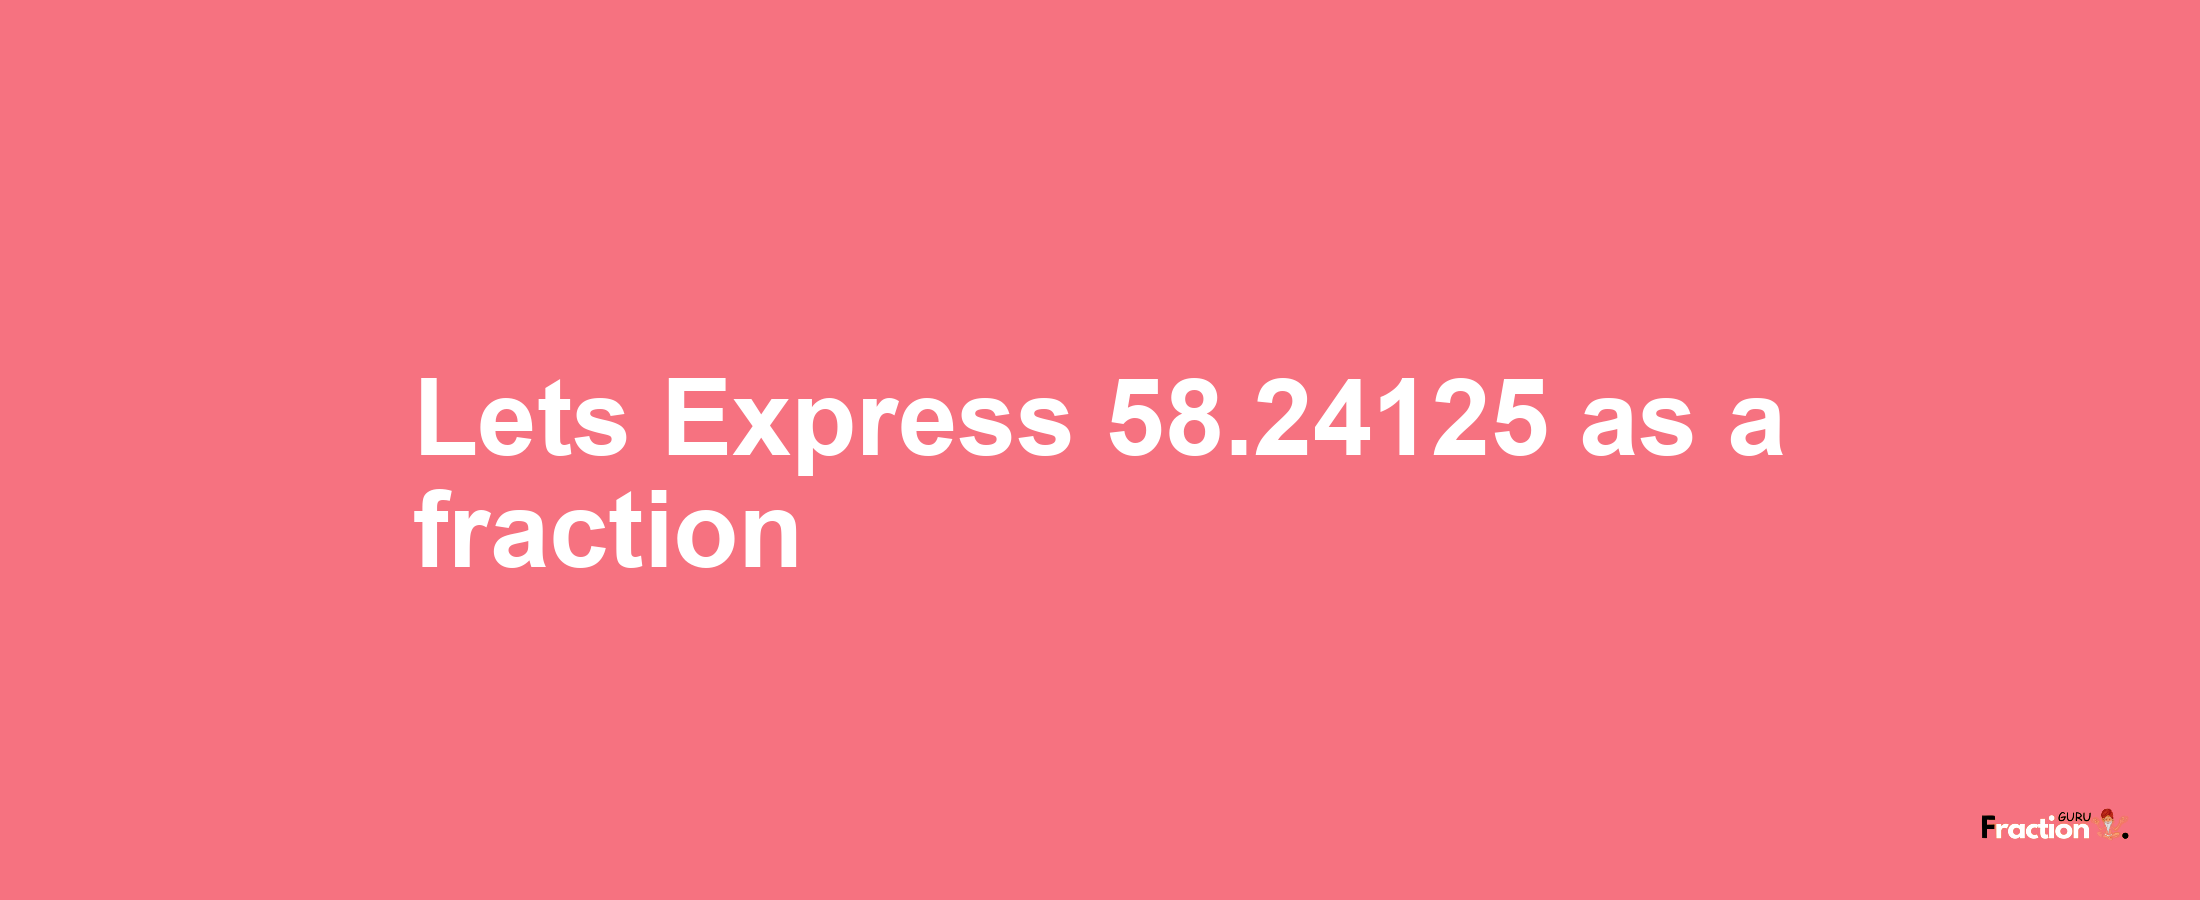 Lets Express 58.24125 as afraction